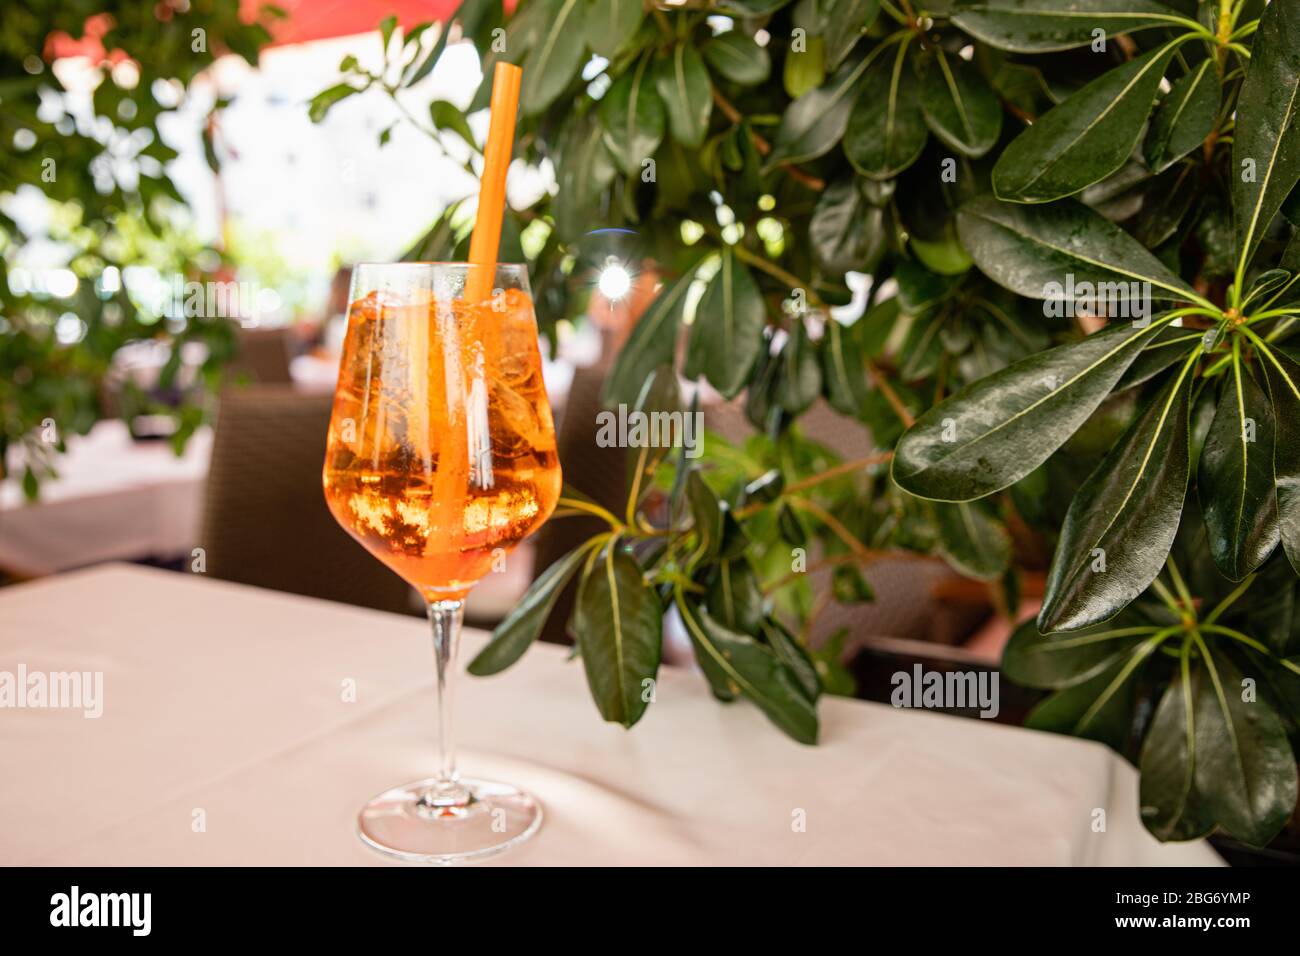 Orange aperol spritz alcoholic summer drink near green plant in cafe, bright background Stock Photo